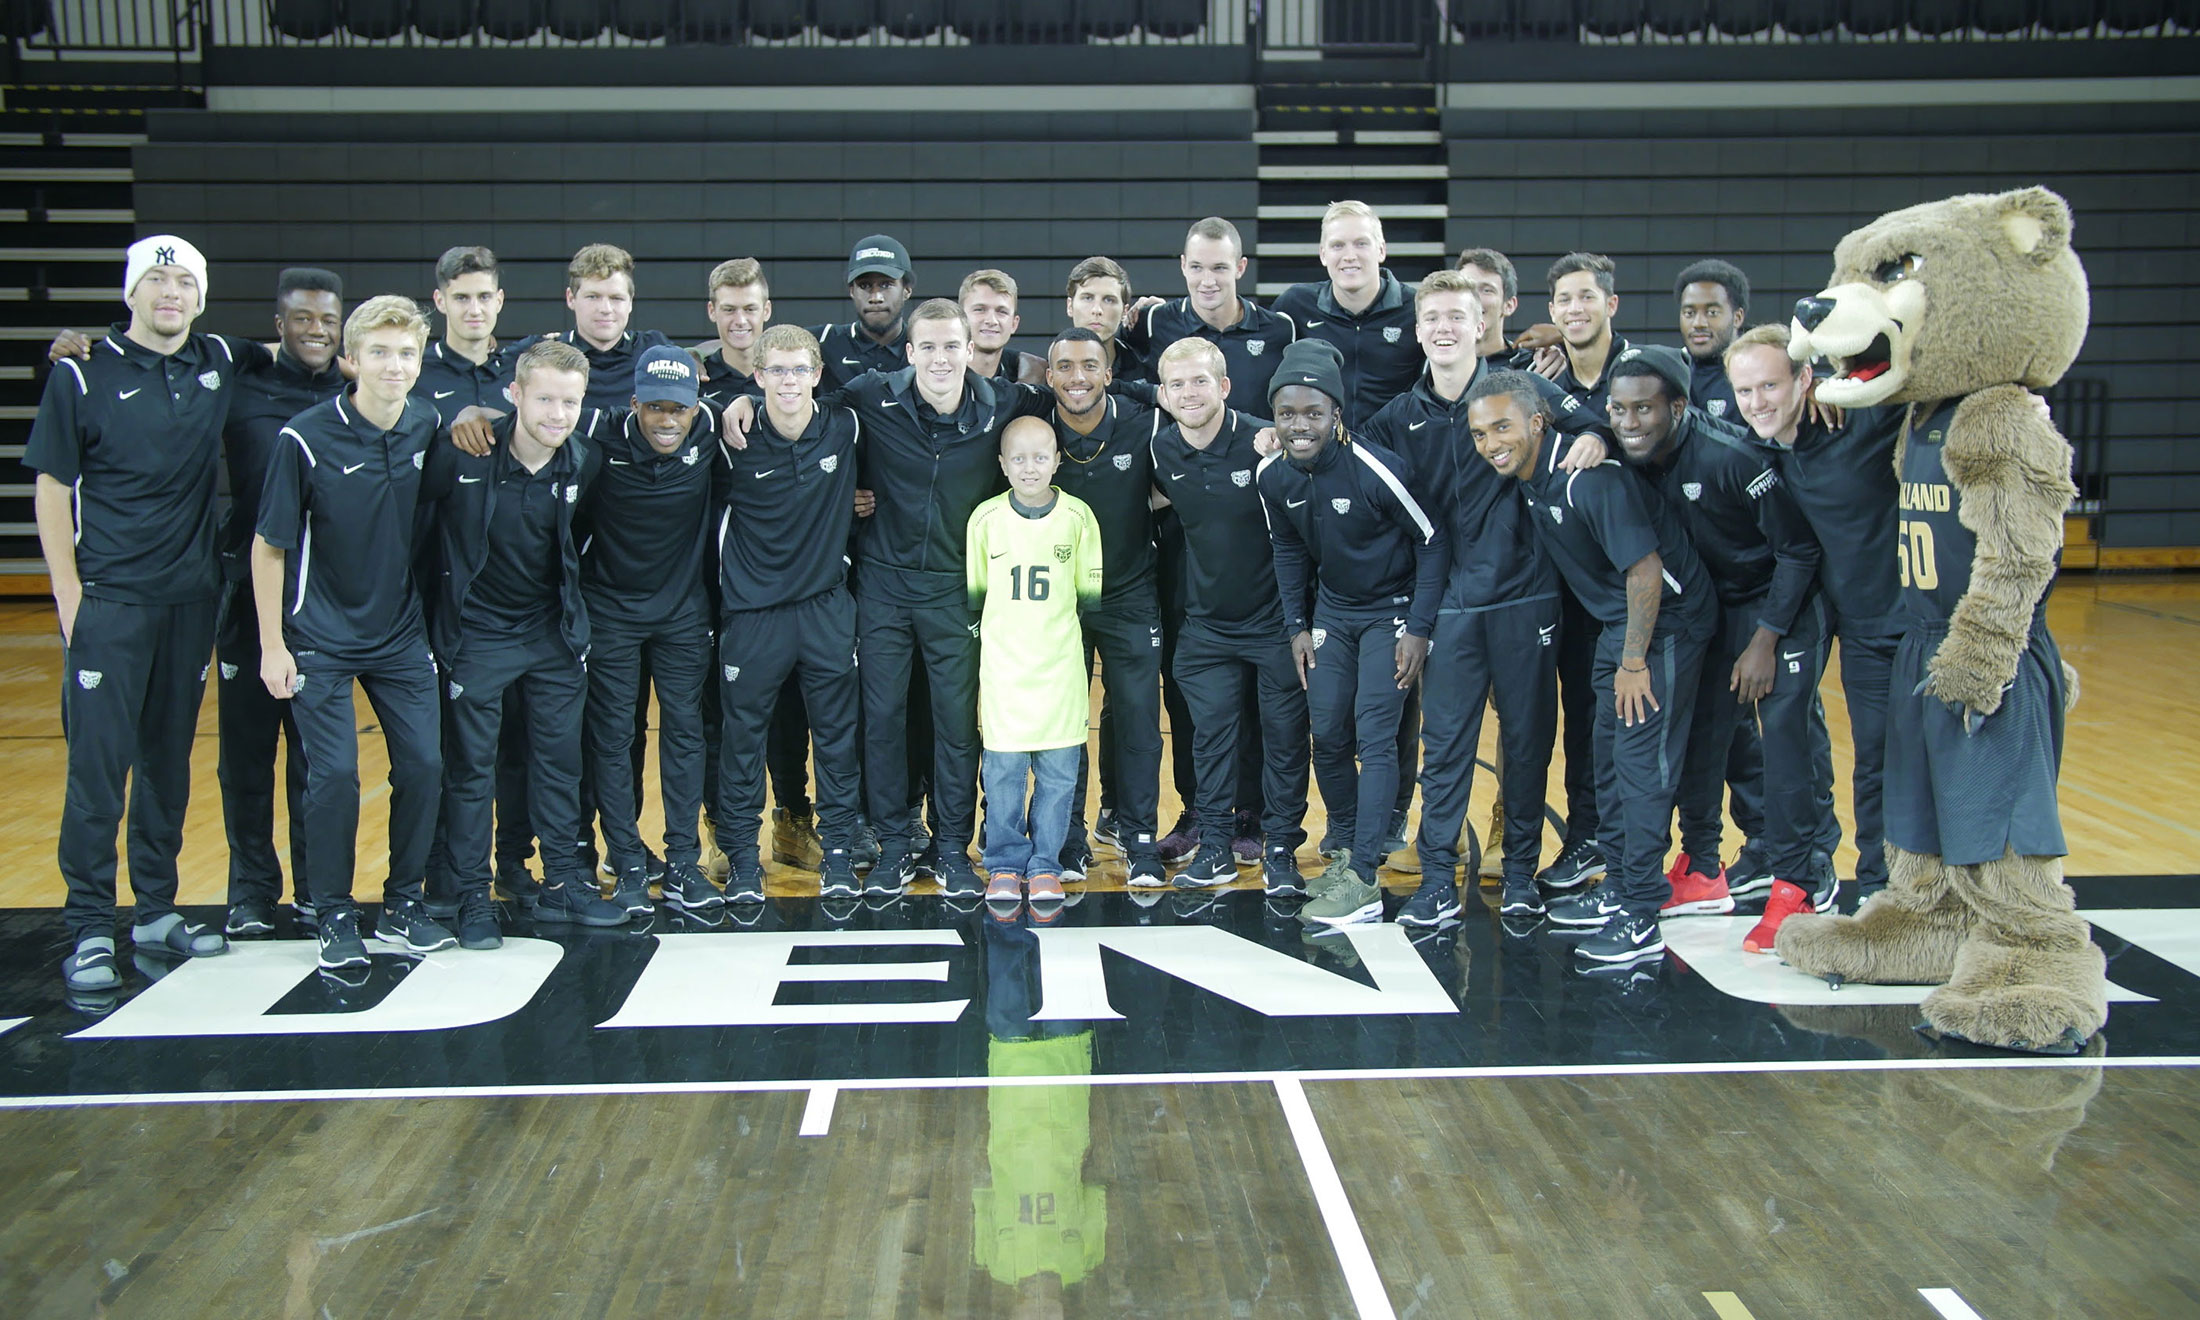 10-year-old Alex VanHolder poses with the Oakland University men's soccer team in the O rena 